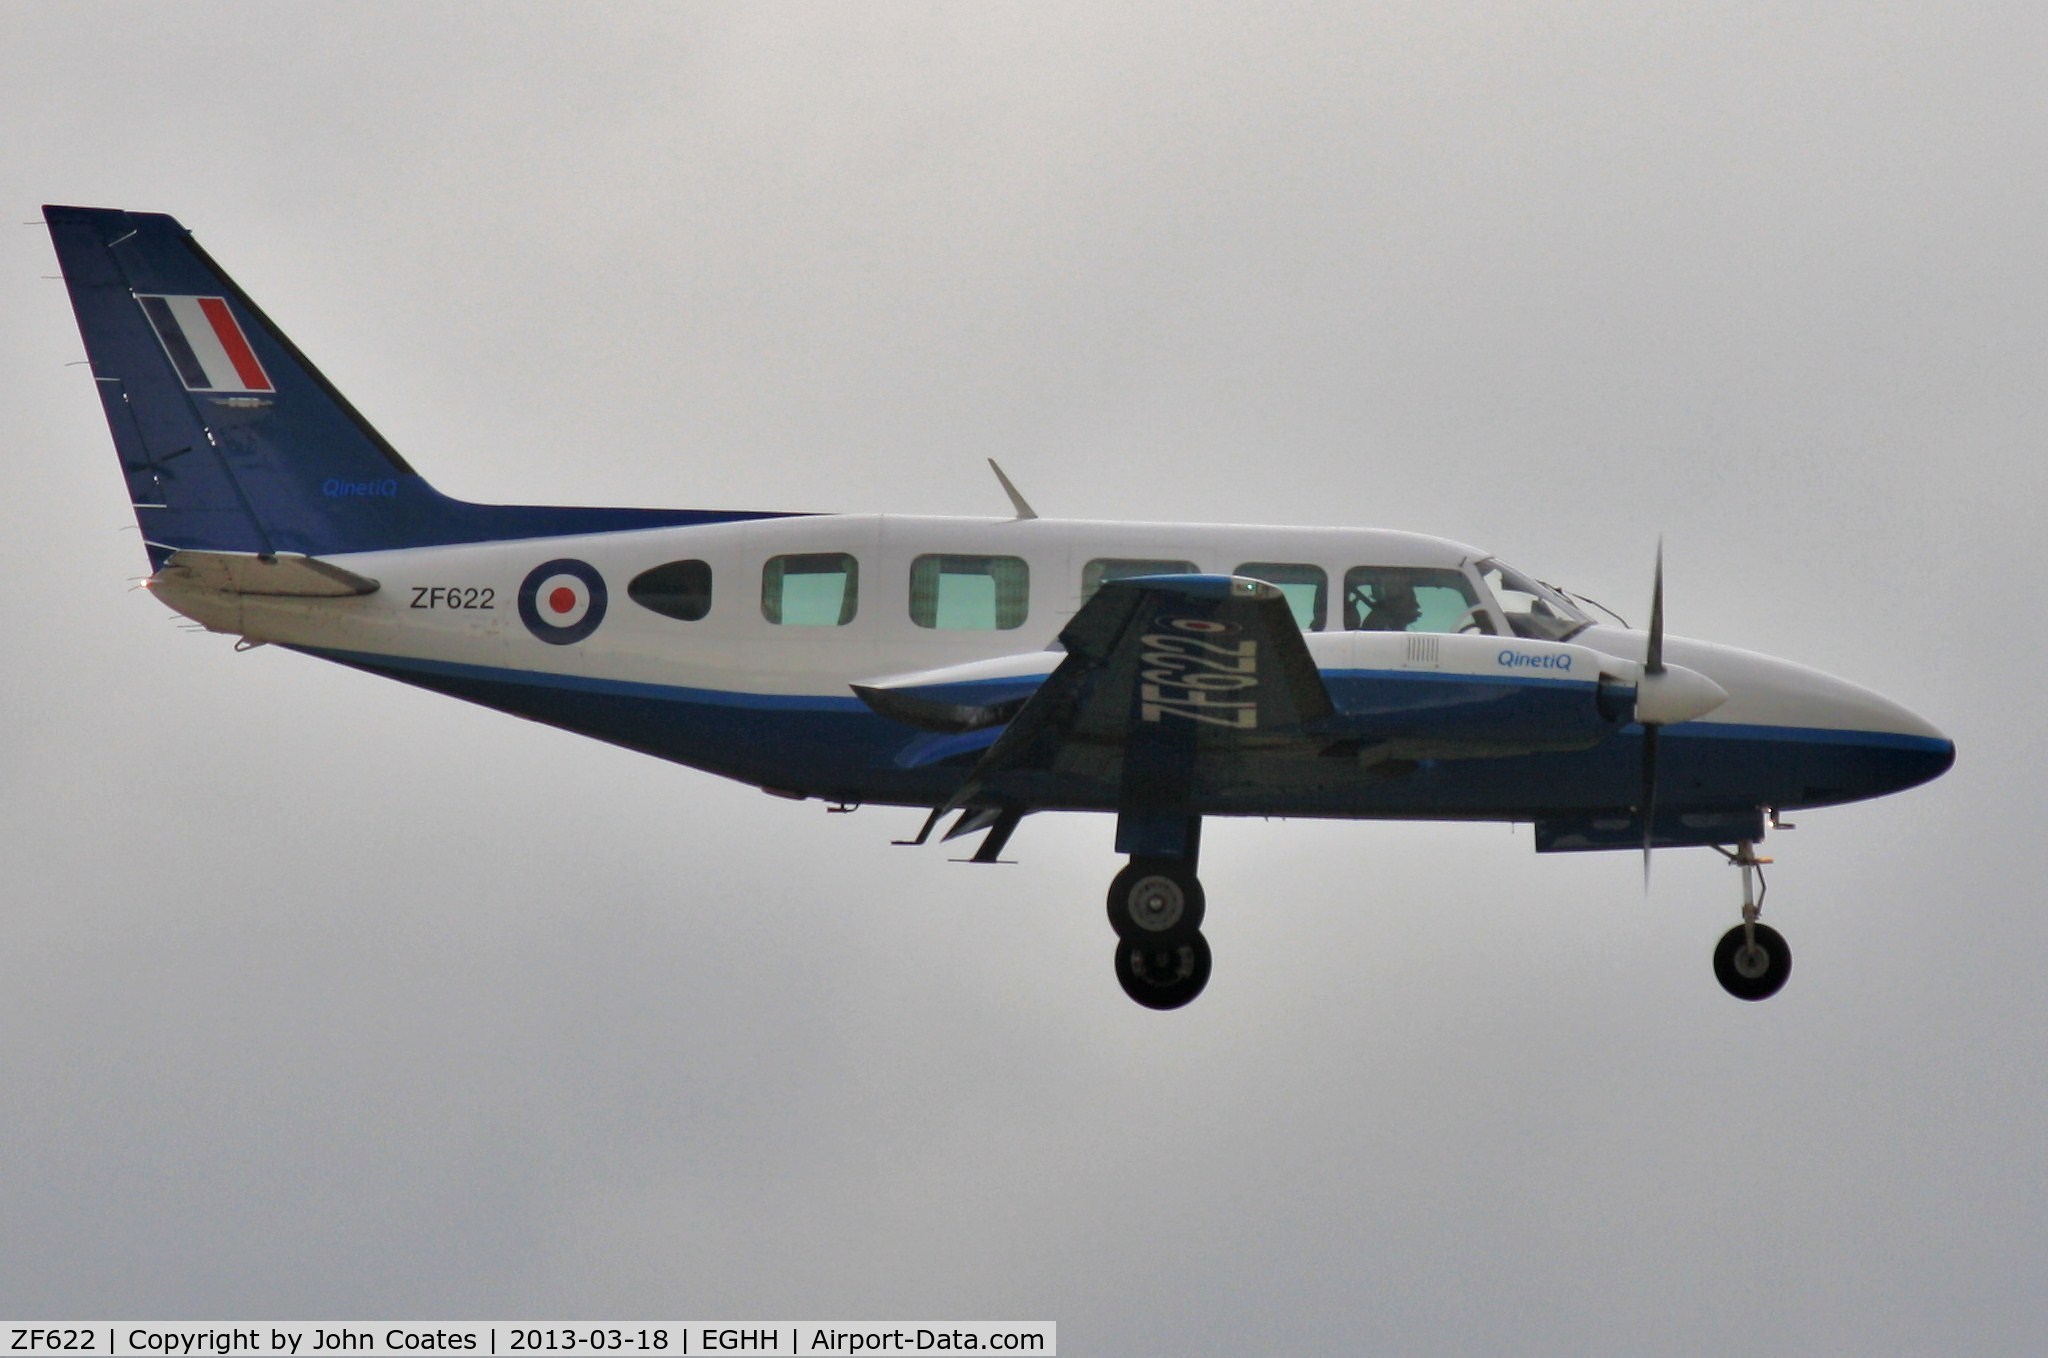 ZF622, 1980 Piper PA-31-350 Navajo Chieftain C/N 31-8052033, Training from Boscombe Down